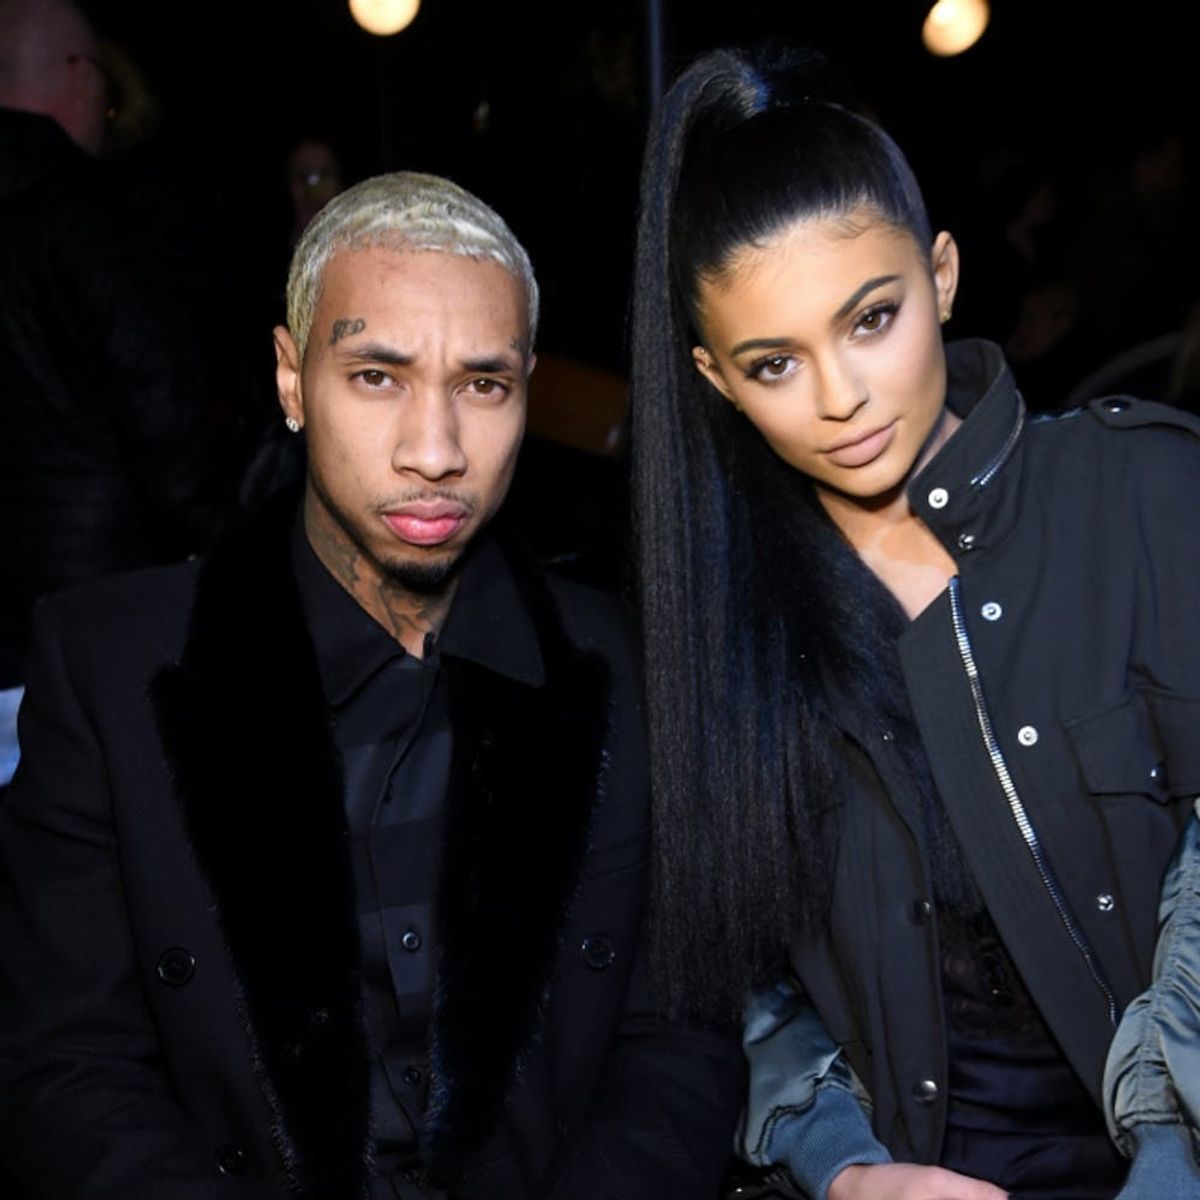 Here’s Why Fans Think Kylie Jenner and Tyga Have Broken Up